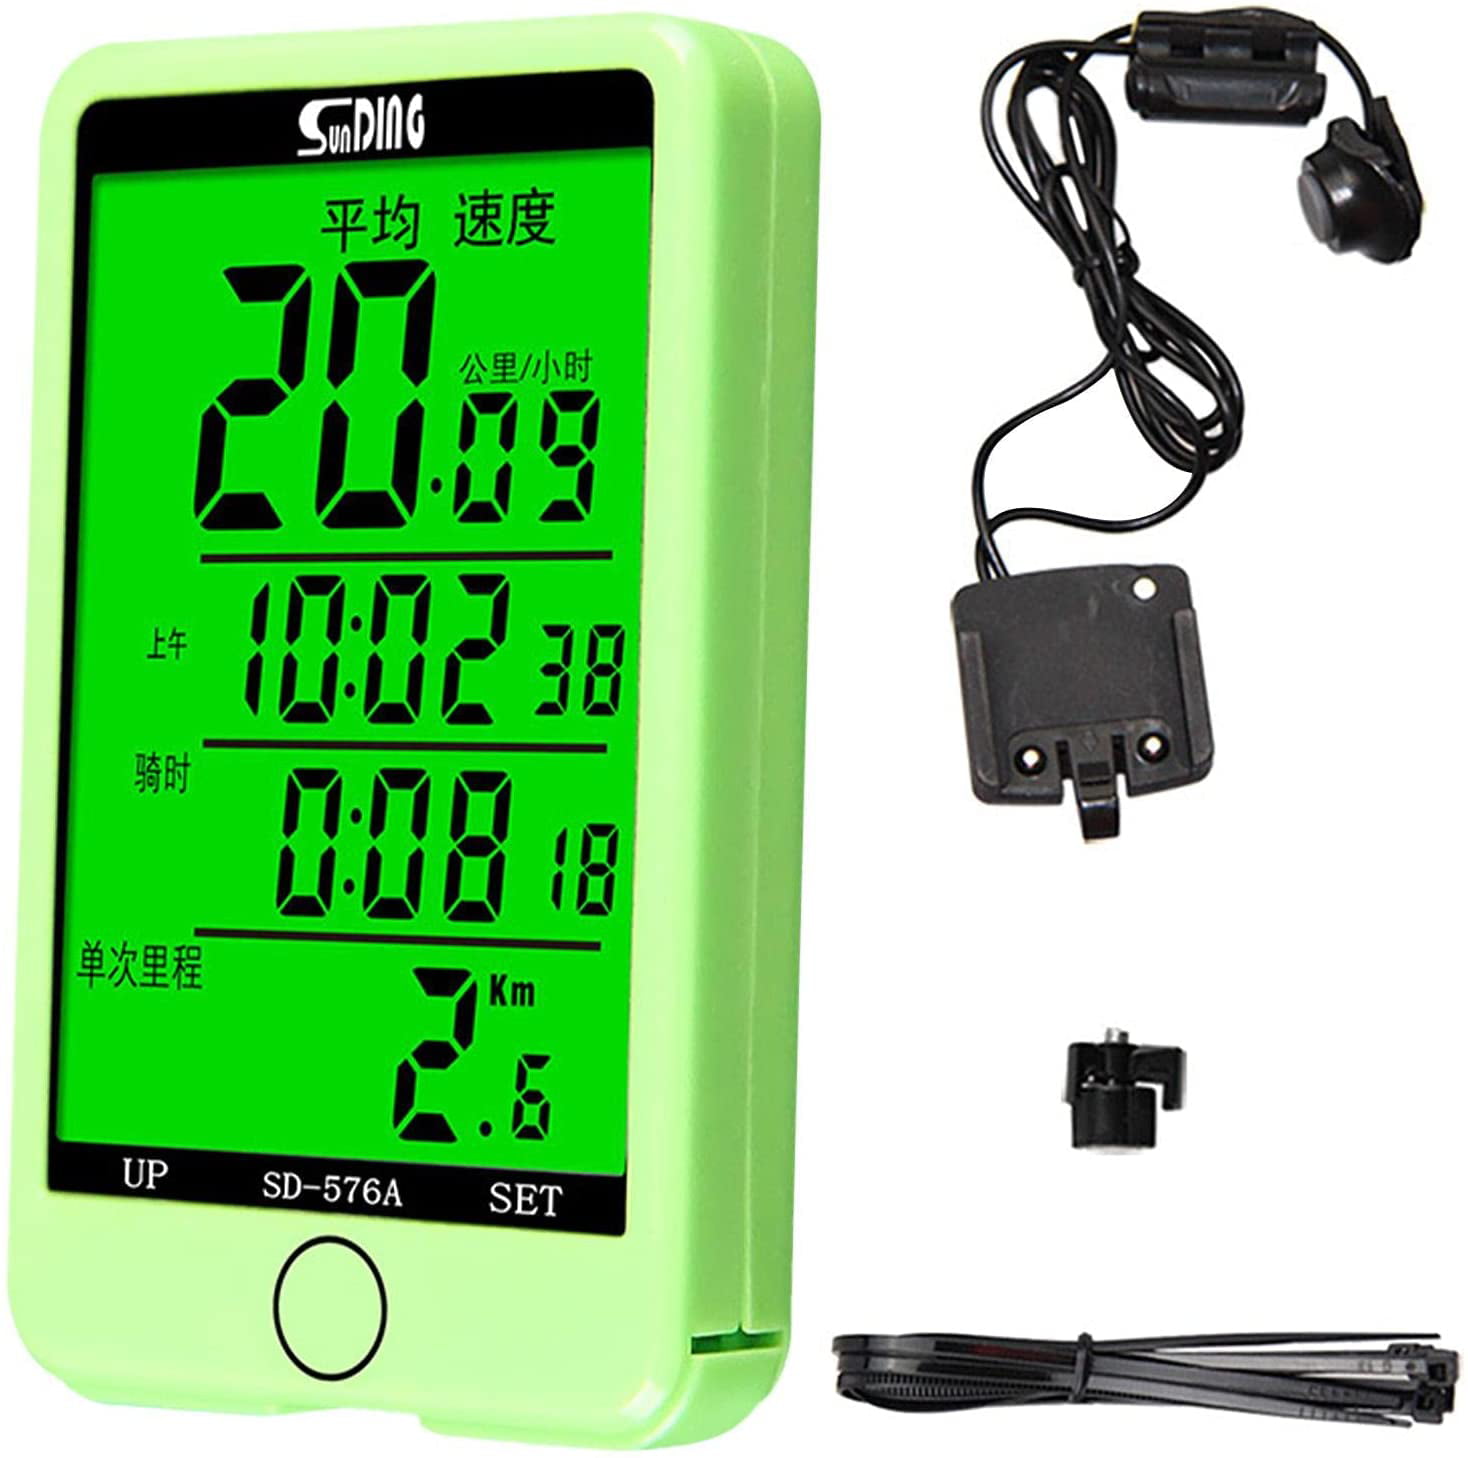 SD-576A Waterproof Bike Computer Touch Screen LCD Display Wired Speedometer 